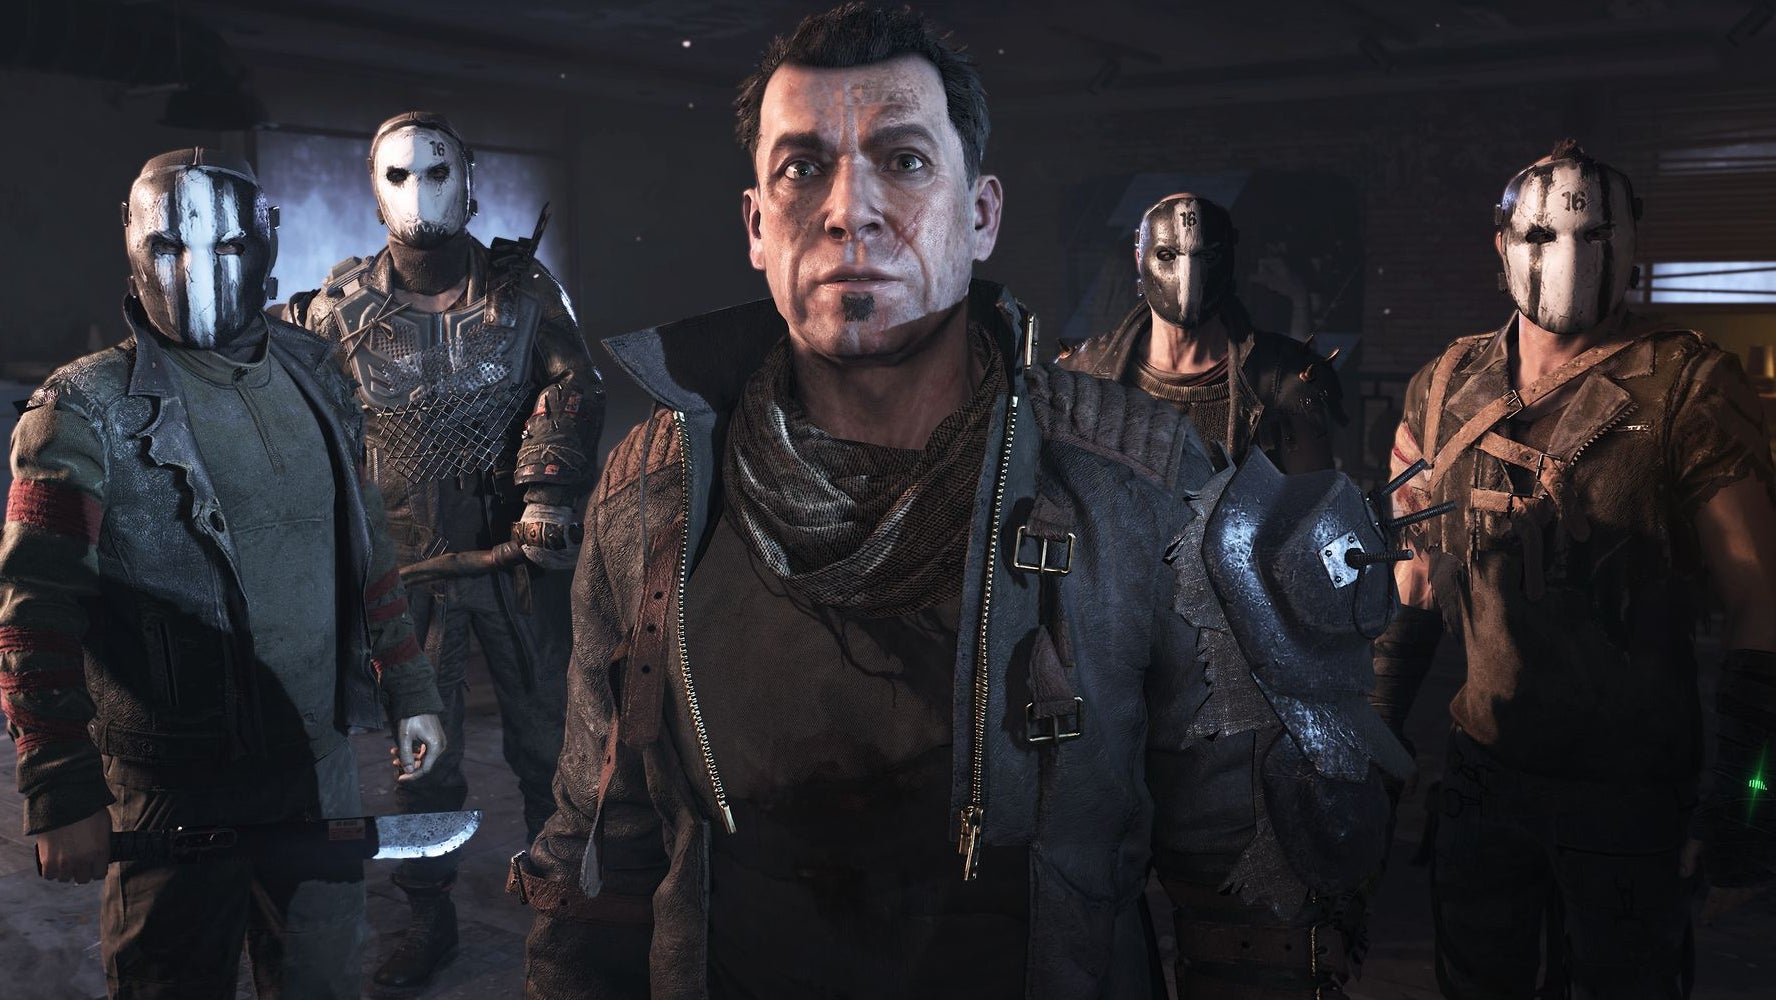 Image for Dying Light 2 factions: Who is best between Peacekeepers or Survivors?